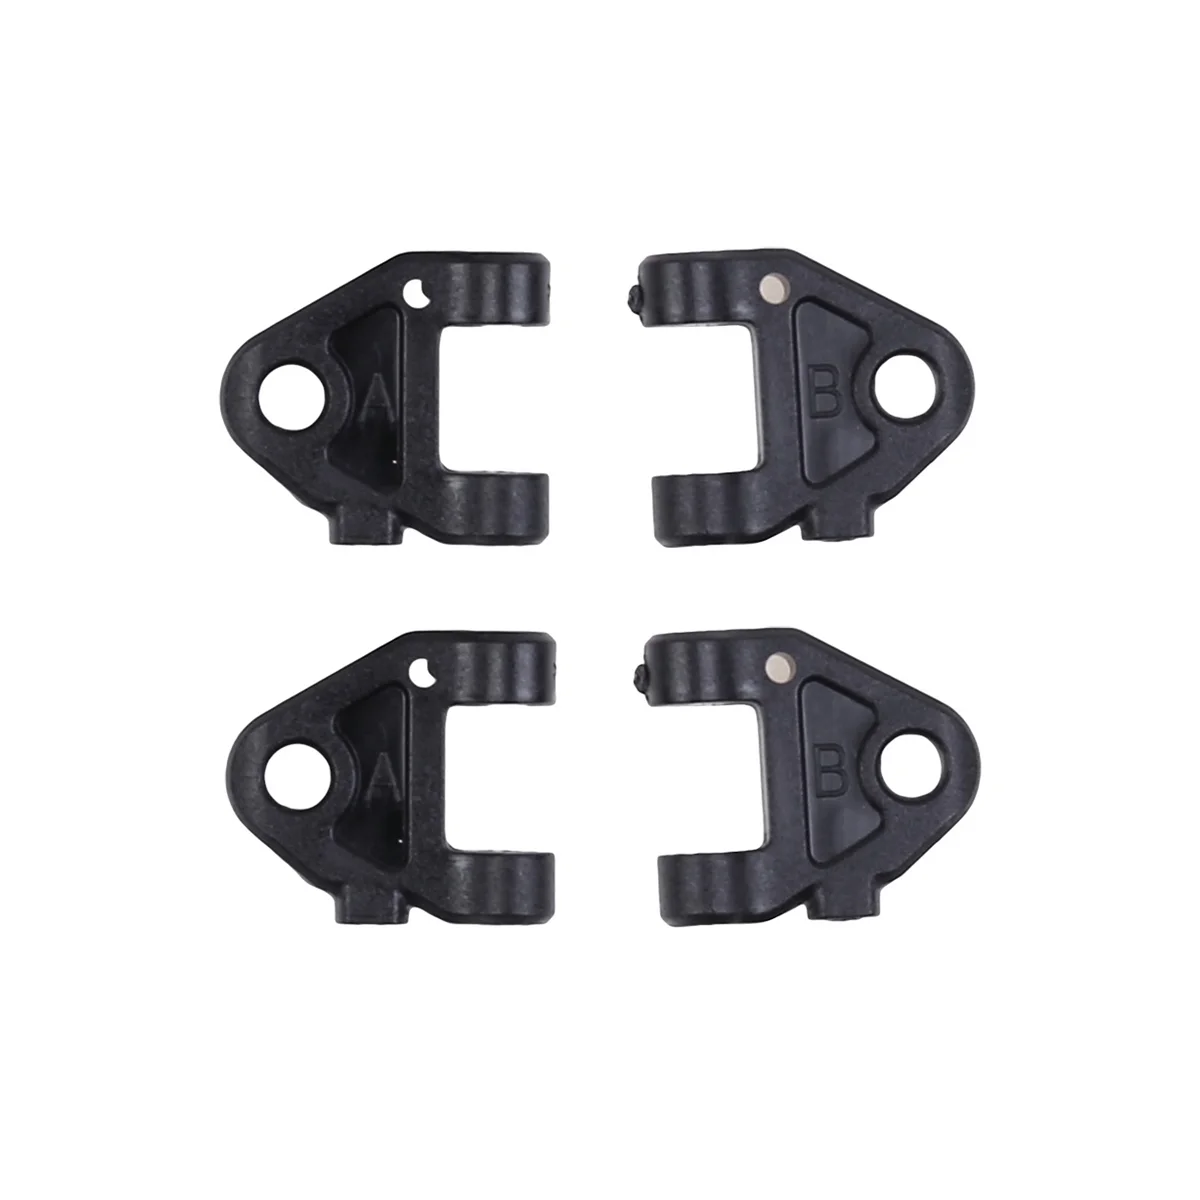 

4Pcs Front and Rear Lower Arm K989-42 for WLtoys K969 K979 K989 K999 P929 P939 284131 284010 284161 1/28 RC Car Parts